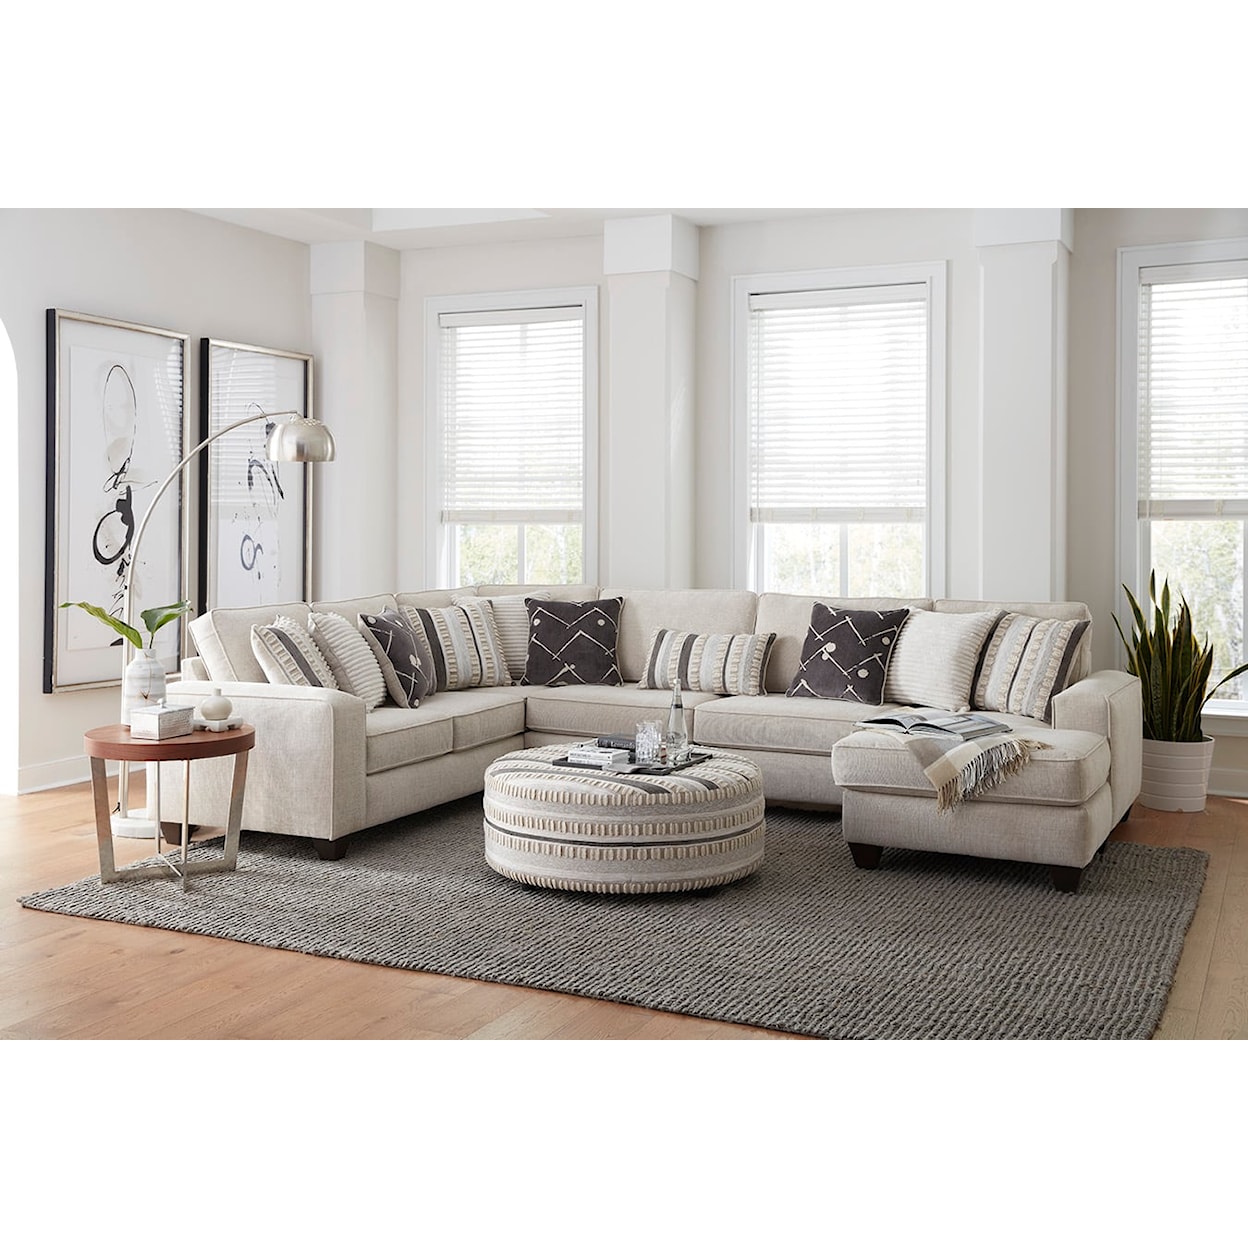 Albany 0462 3PC BEIGE RAF CHAISE SECTIONAL